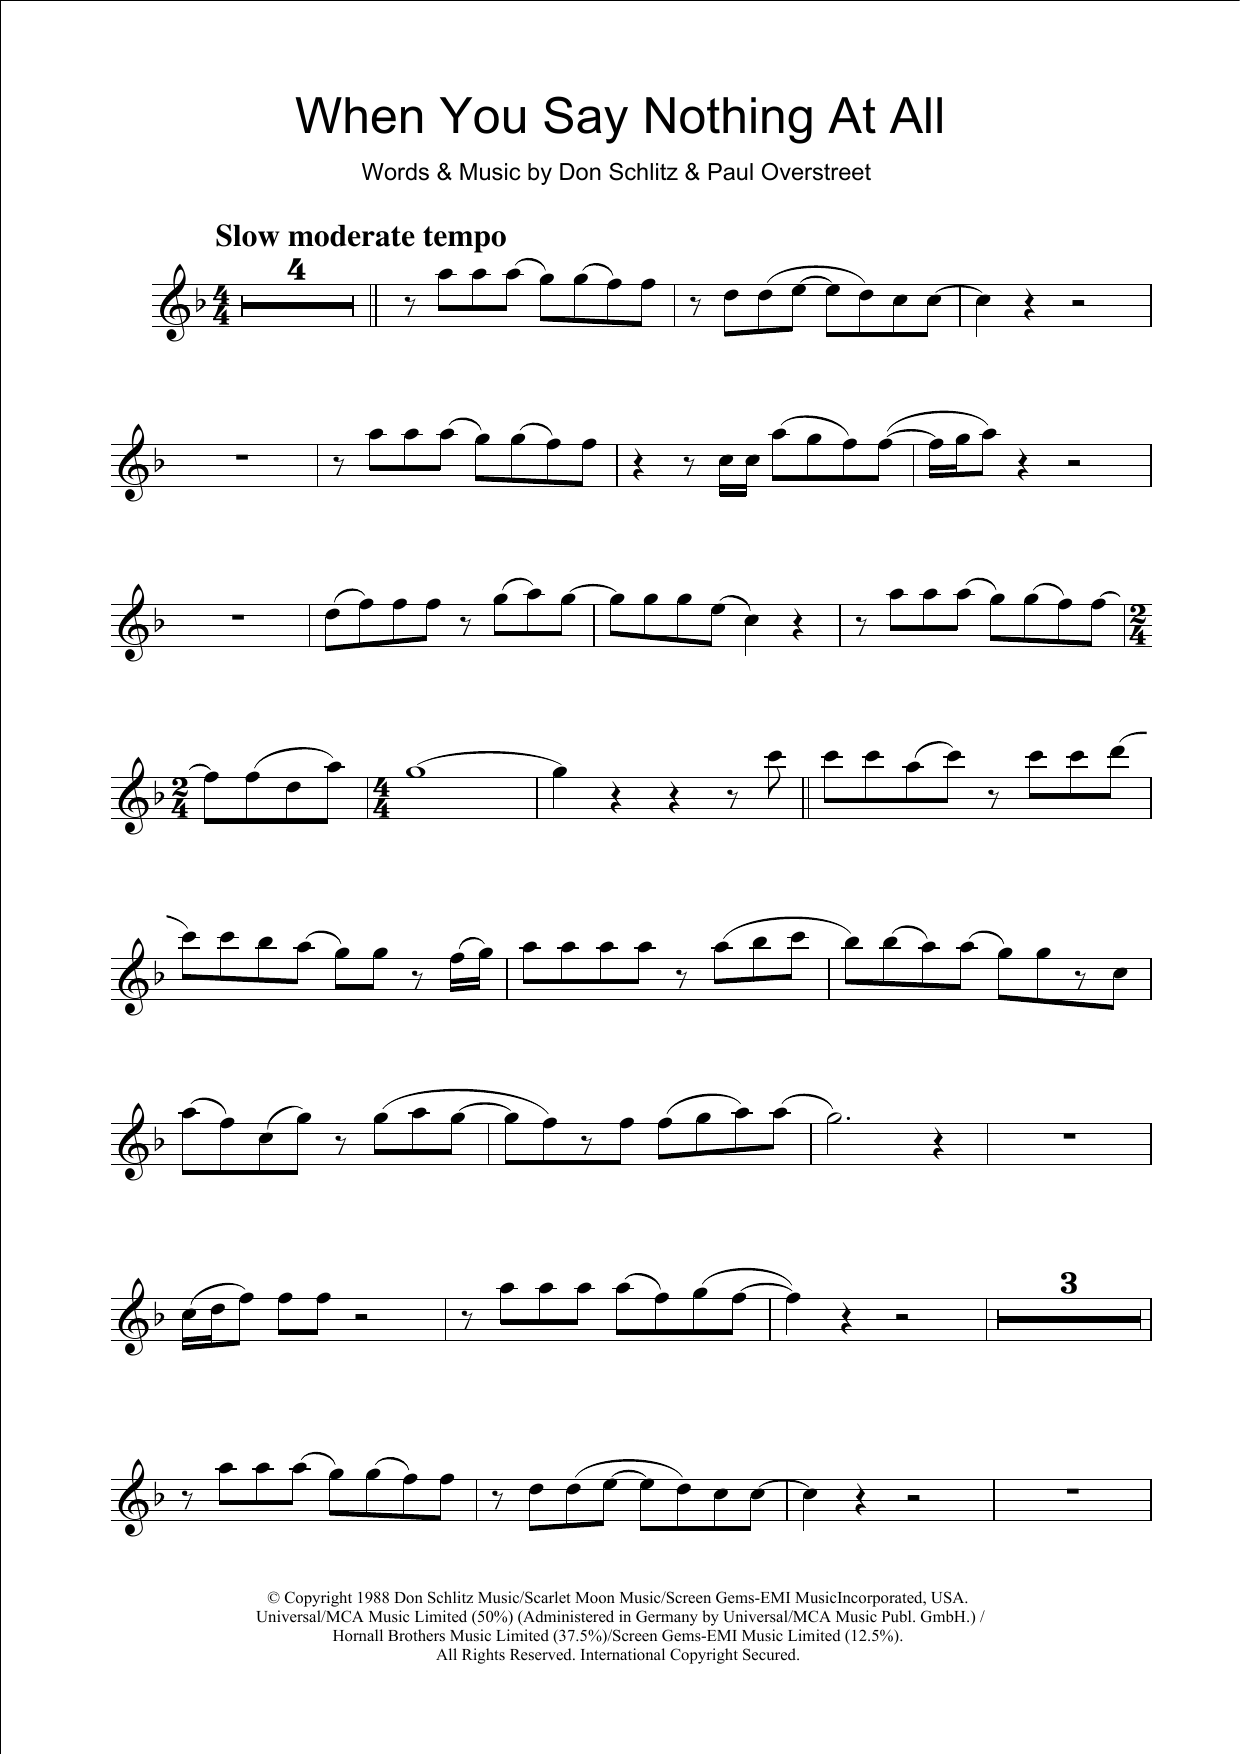 Download Alison Krauss When You Say Nothing At All Sheet Music